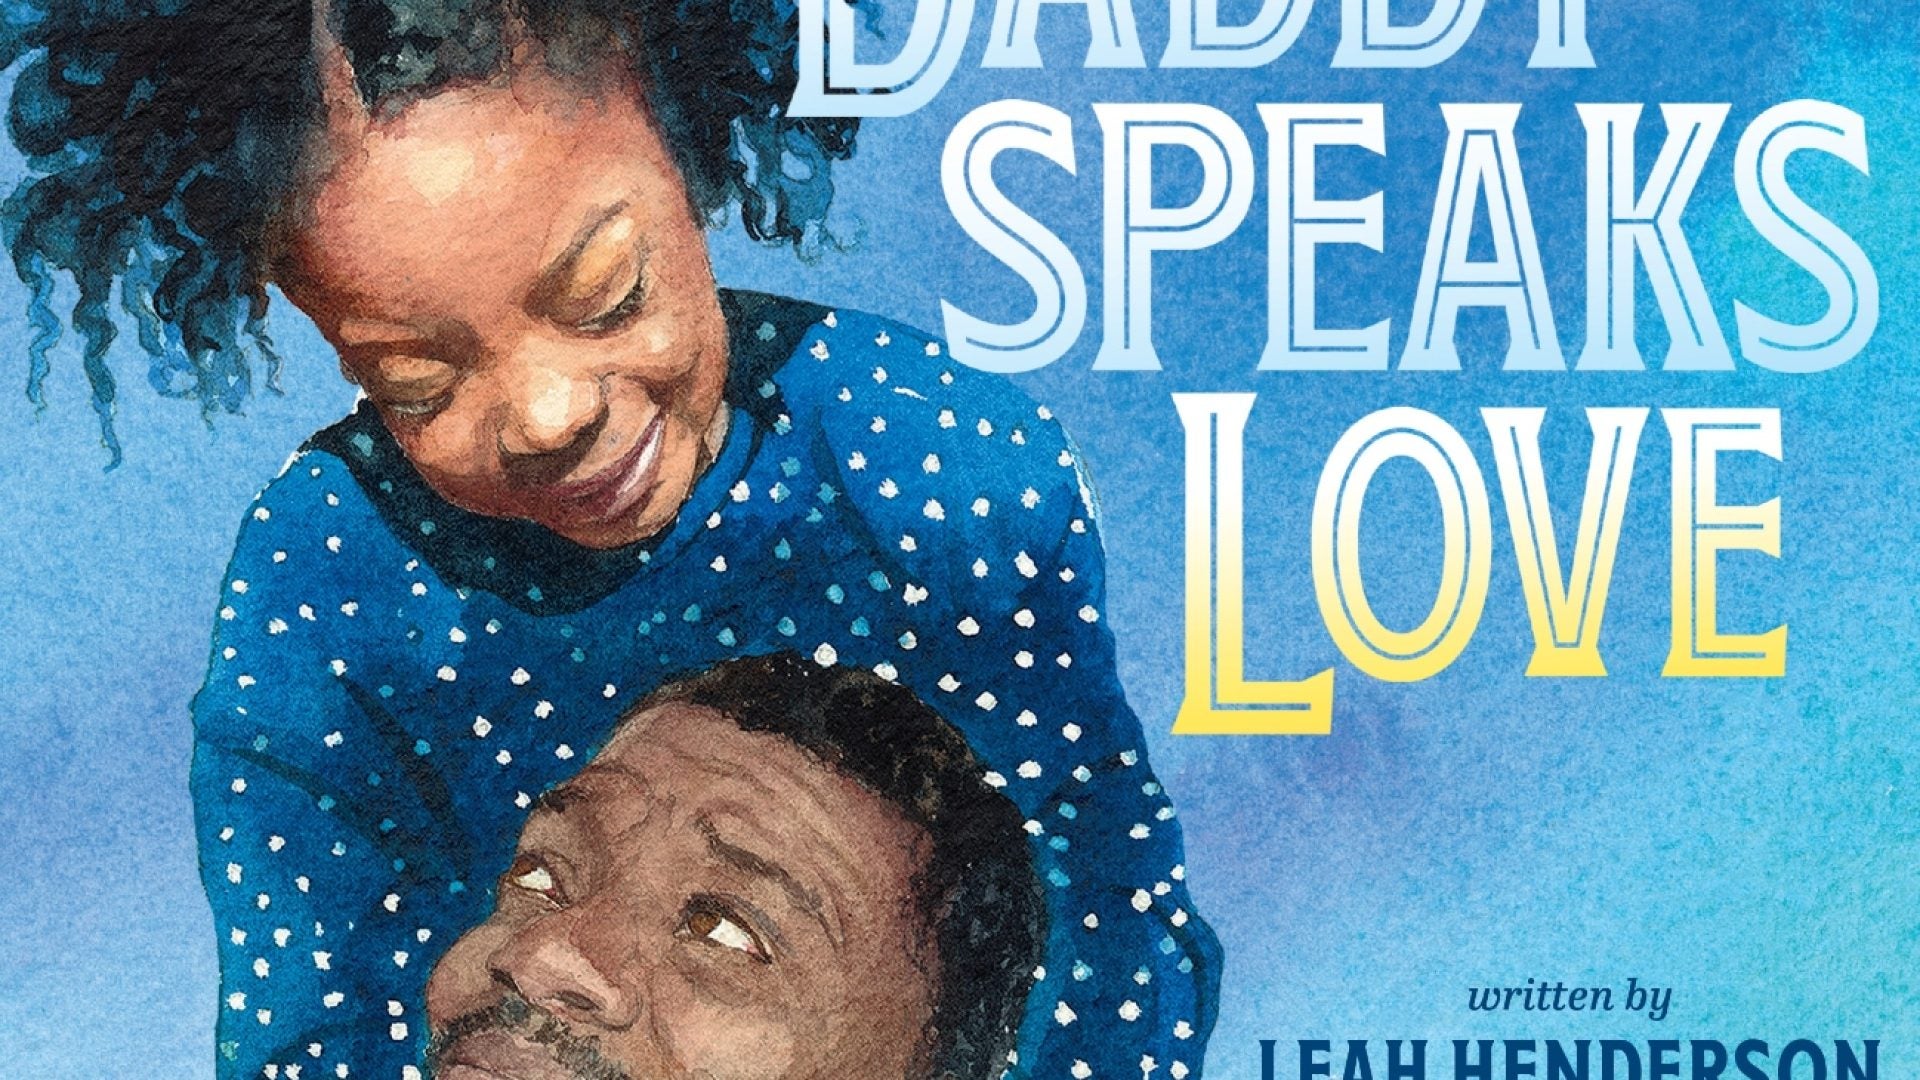 Inspired By George Floyd And Daughter Gianna, 'Daddy Speaks Love' Is A Tribute To The Bond Between Father And Child